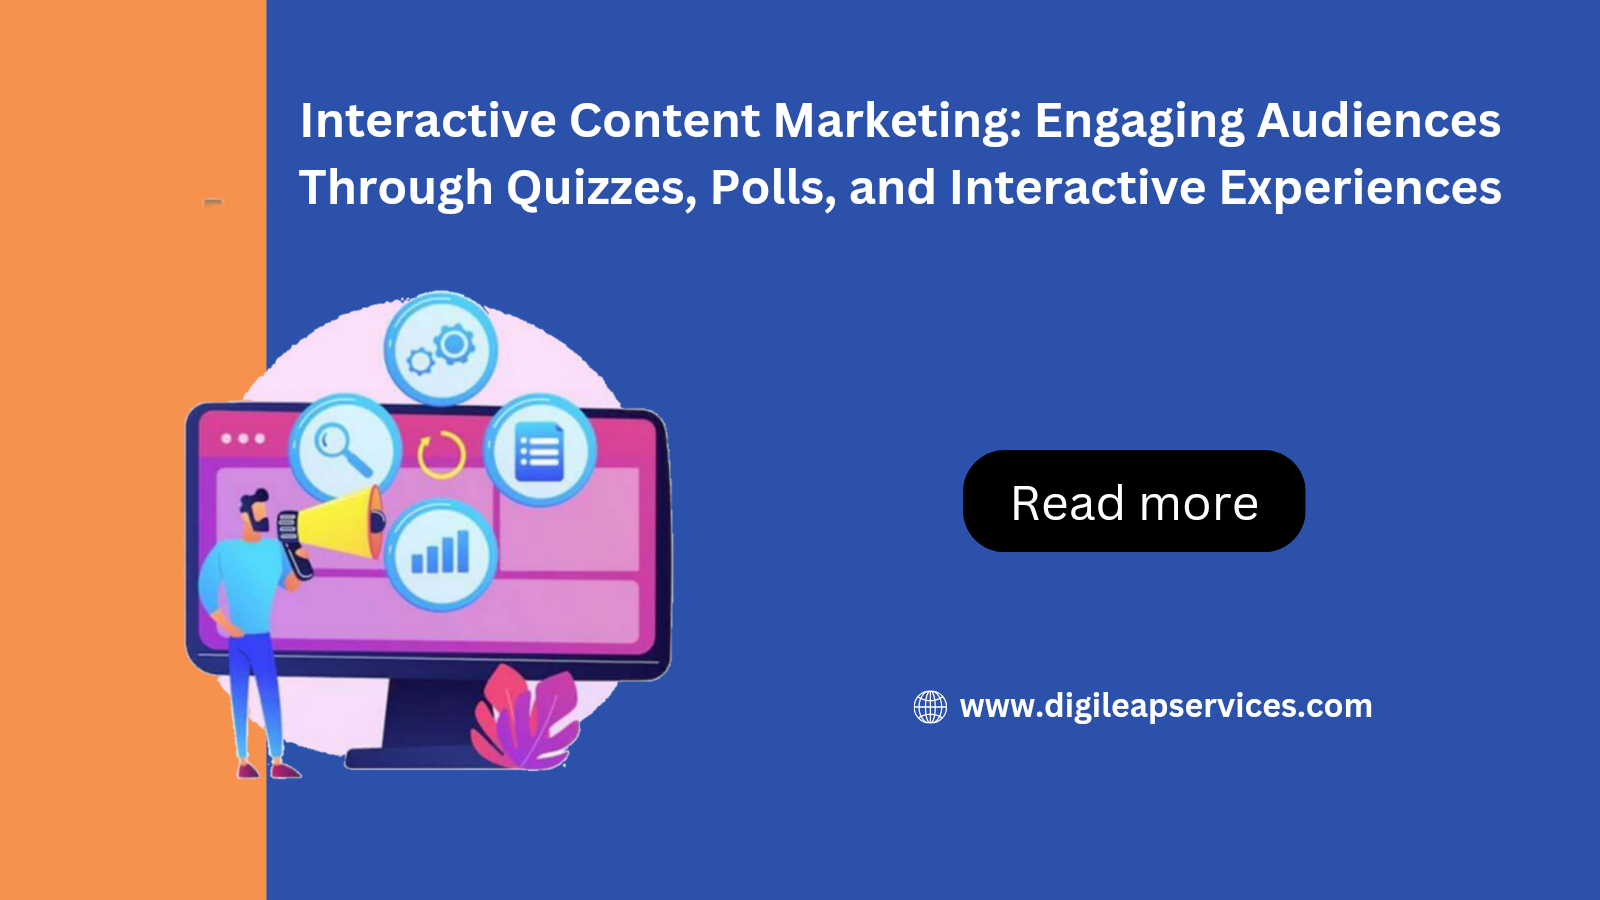 Interactive Content Marketing: Engaging Audiences Through Quizzes, Polls, and Interactive Experiences